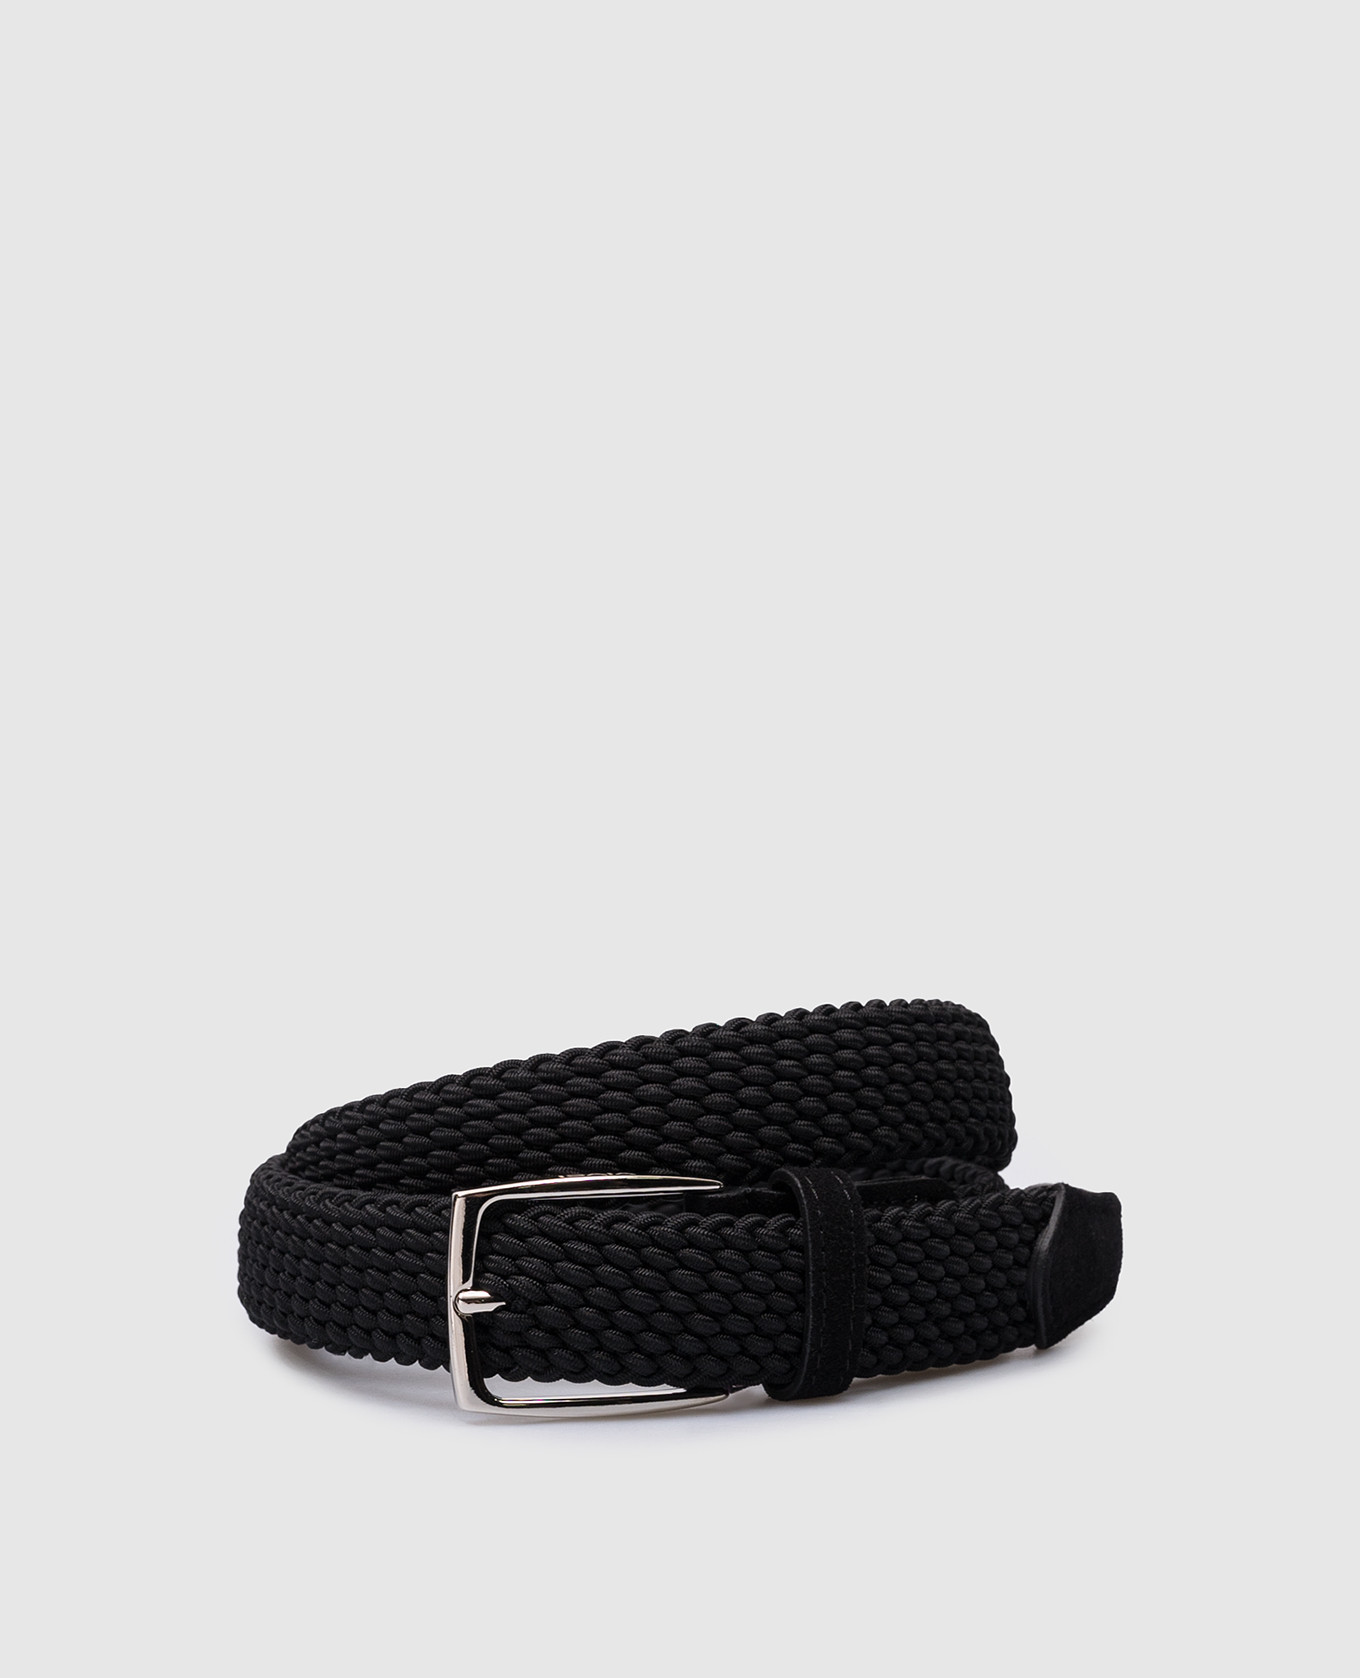 Black woven belt with logo engraving